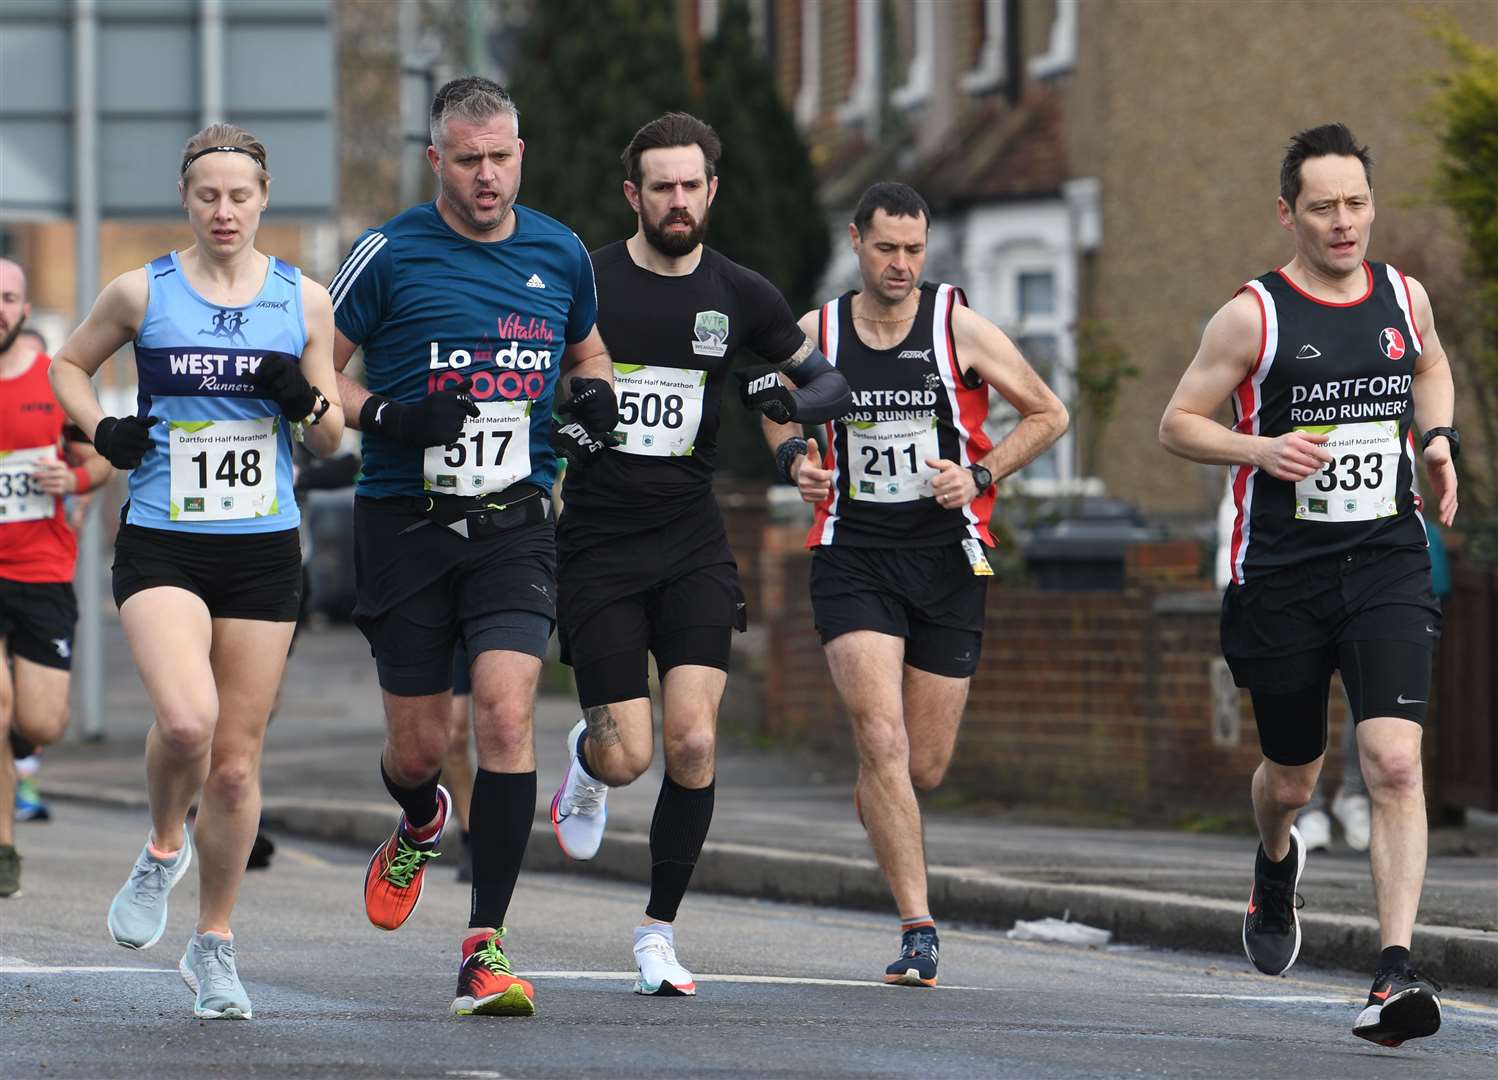 Dartford Road Runners' Mark Reynolds (No.333) and clubmate Steve Jarvis (No.211). Picture: Barry Goodwin (55423011)